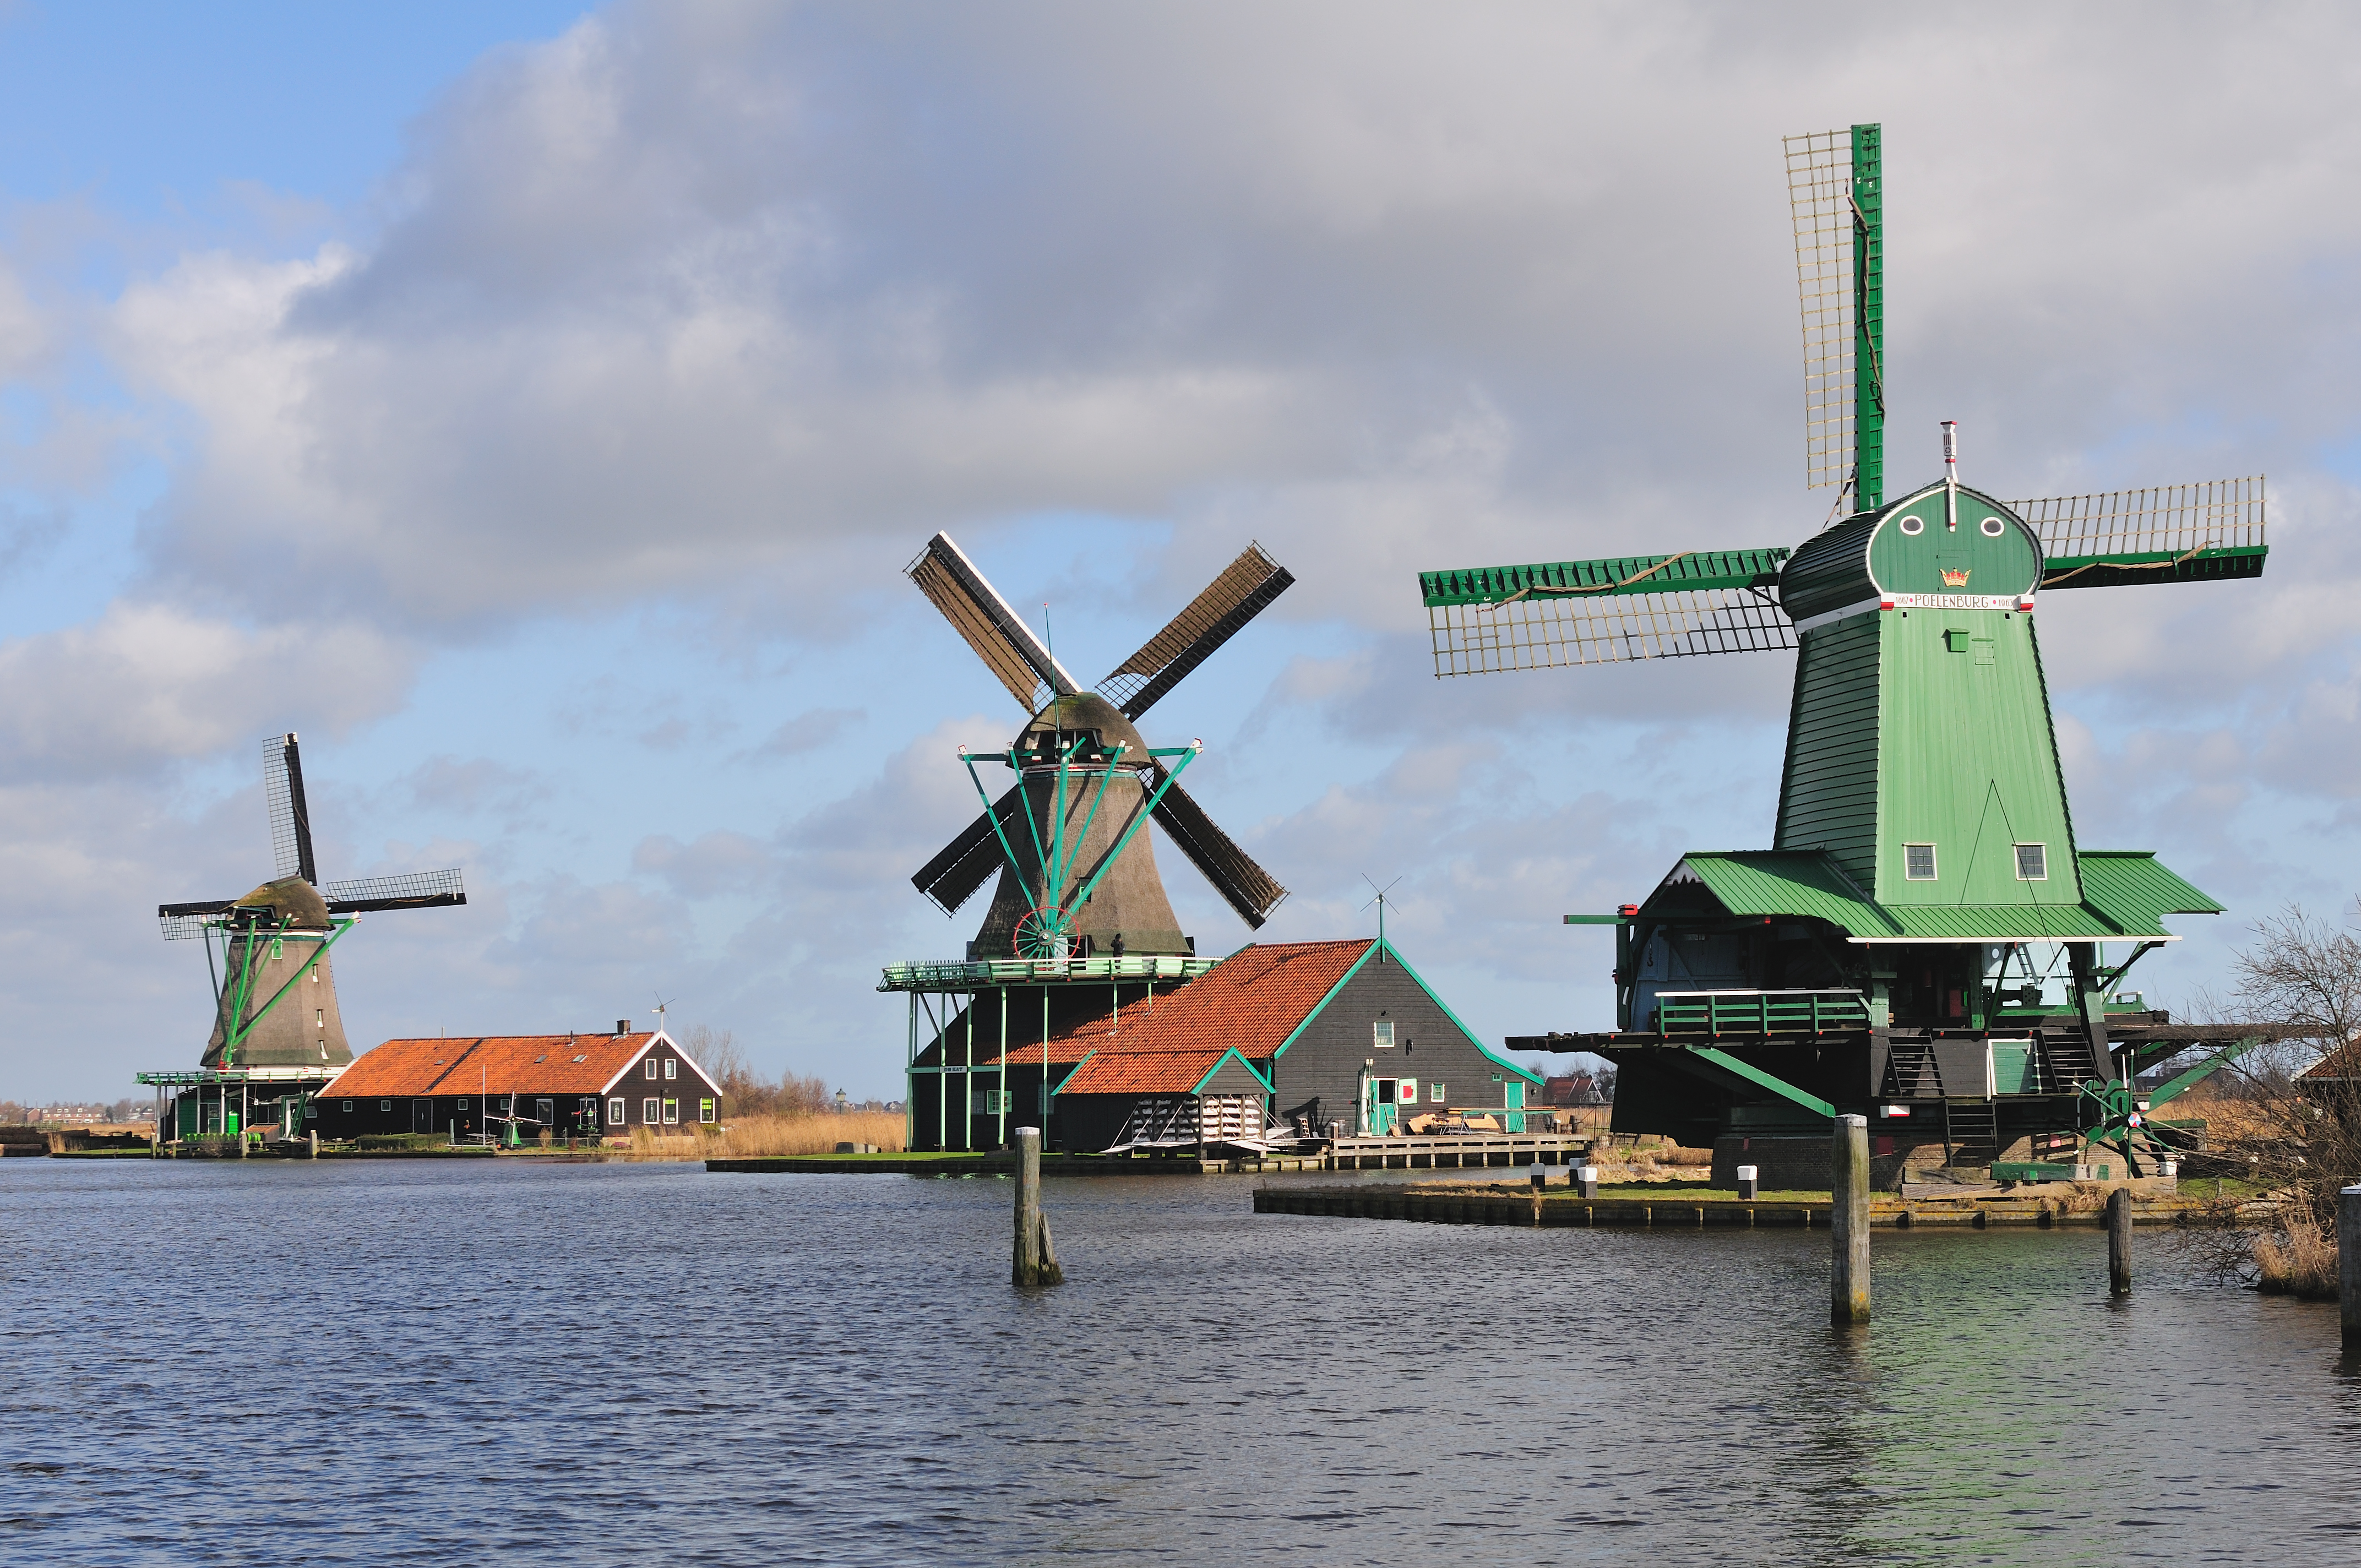 Best Things to Do in Amsterdam with Family - Windmills in Amsterdam